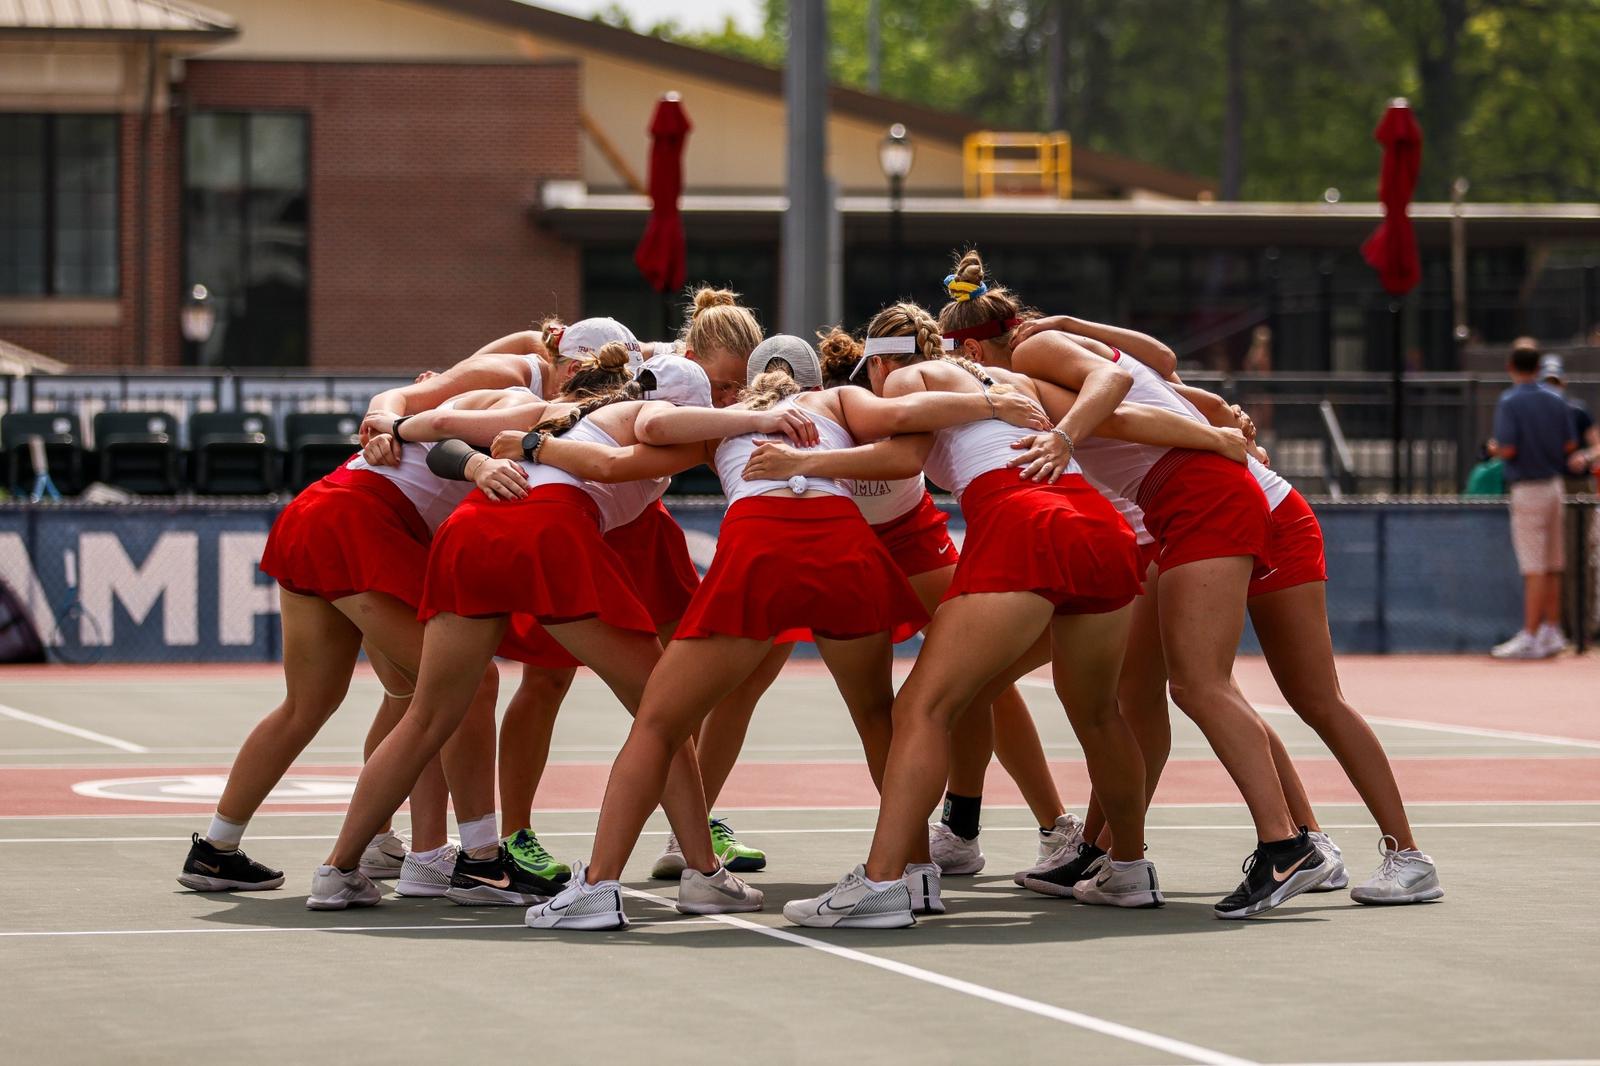 Women’s Tennis Falls 4-3 to SMU in First Round of the NCAA Tournament